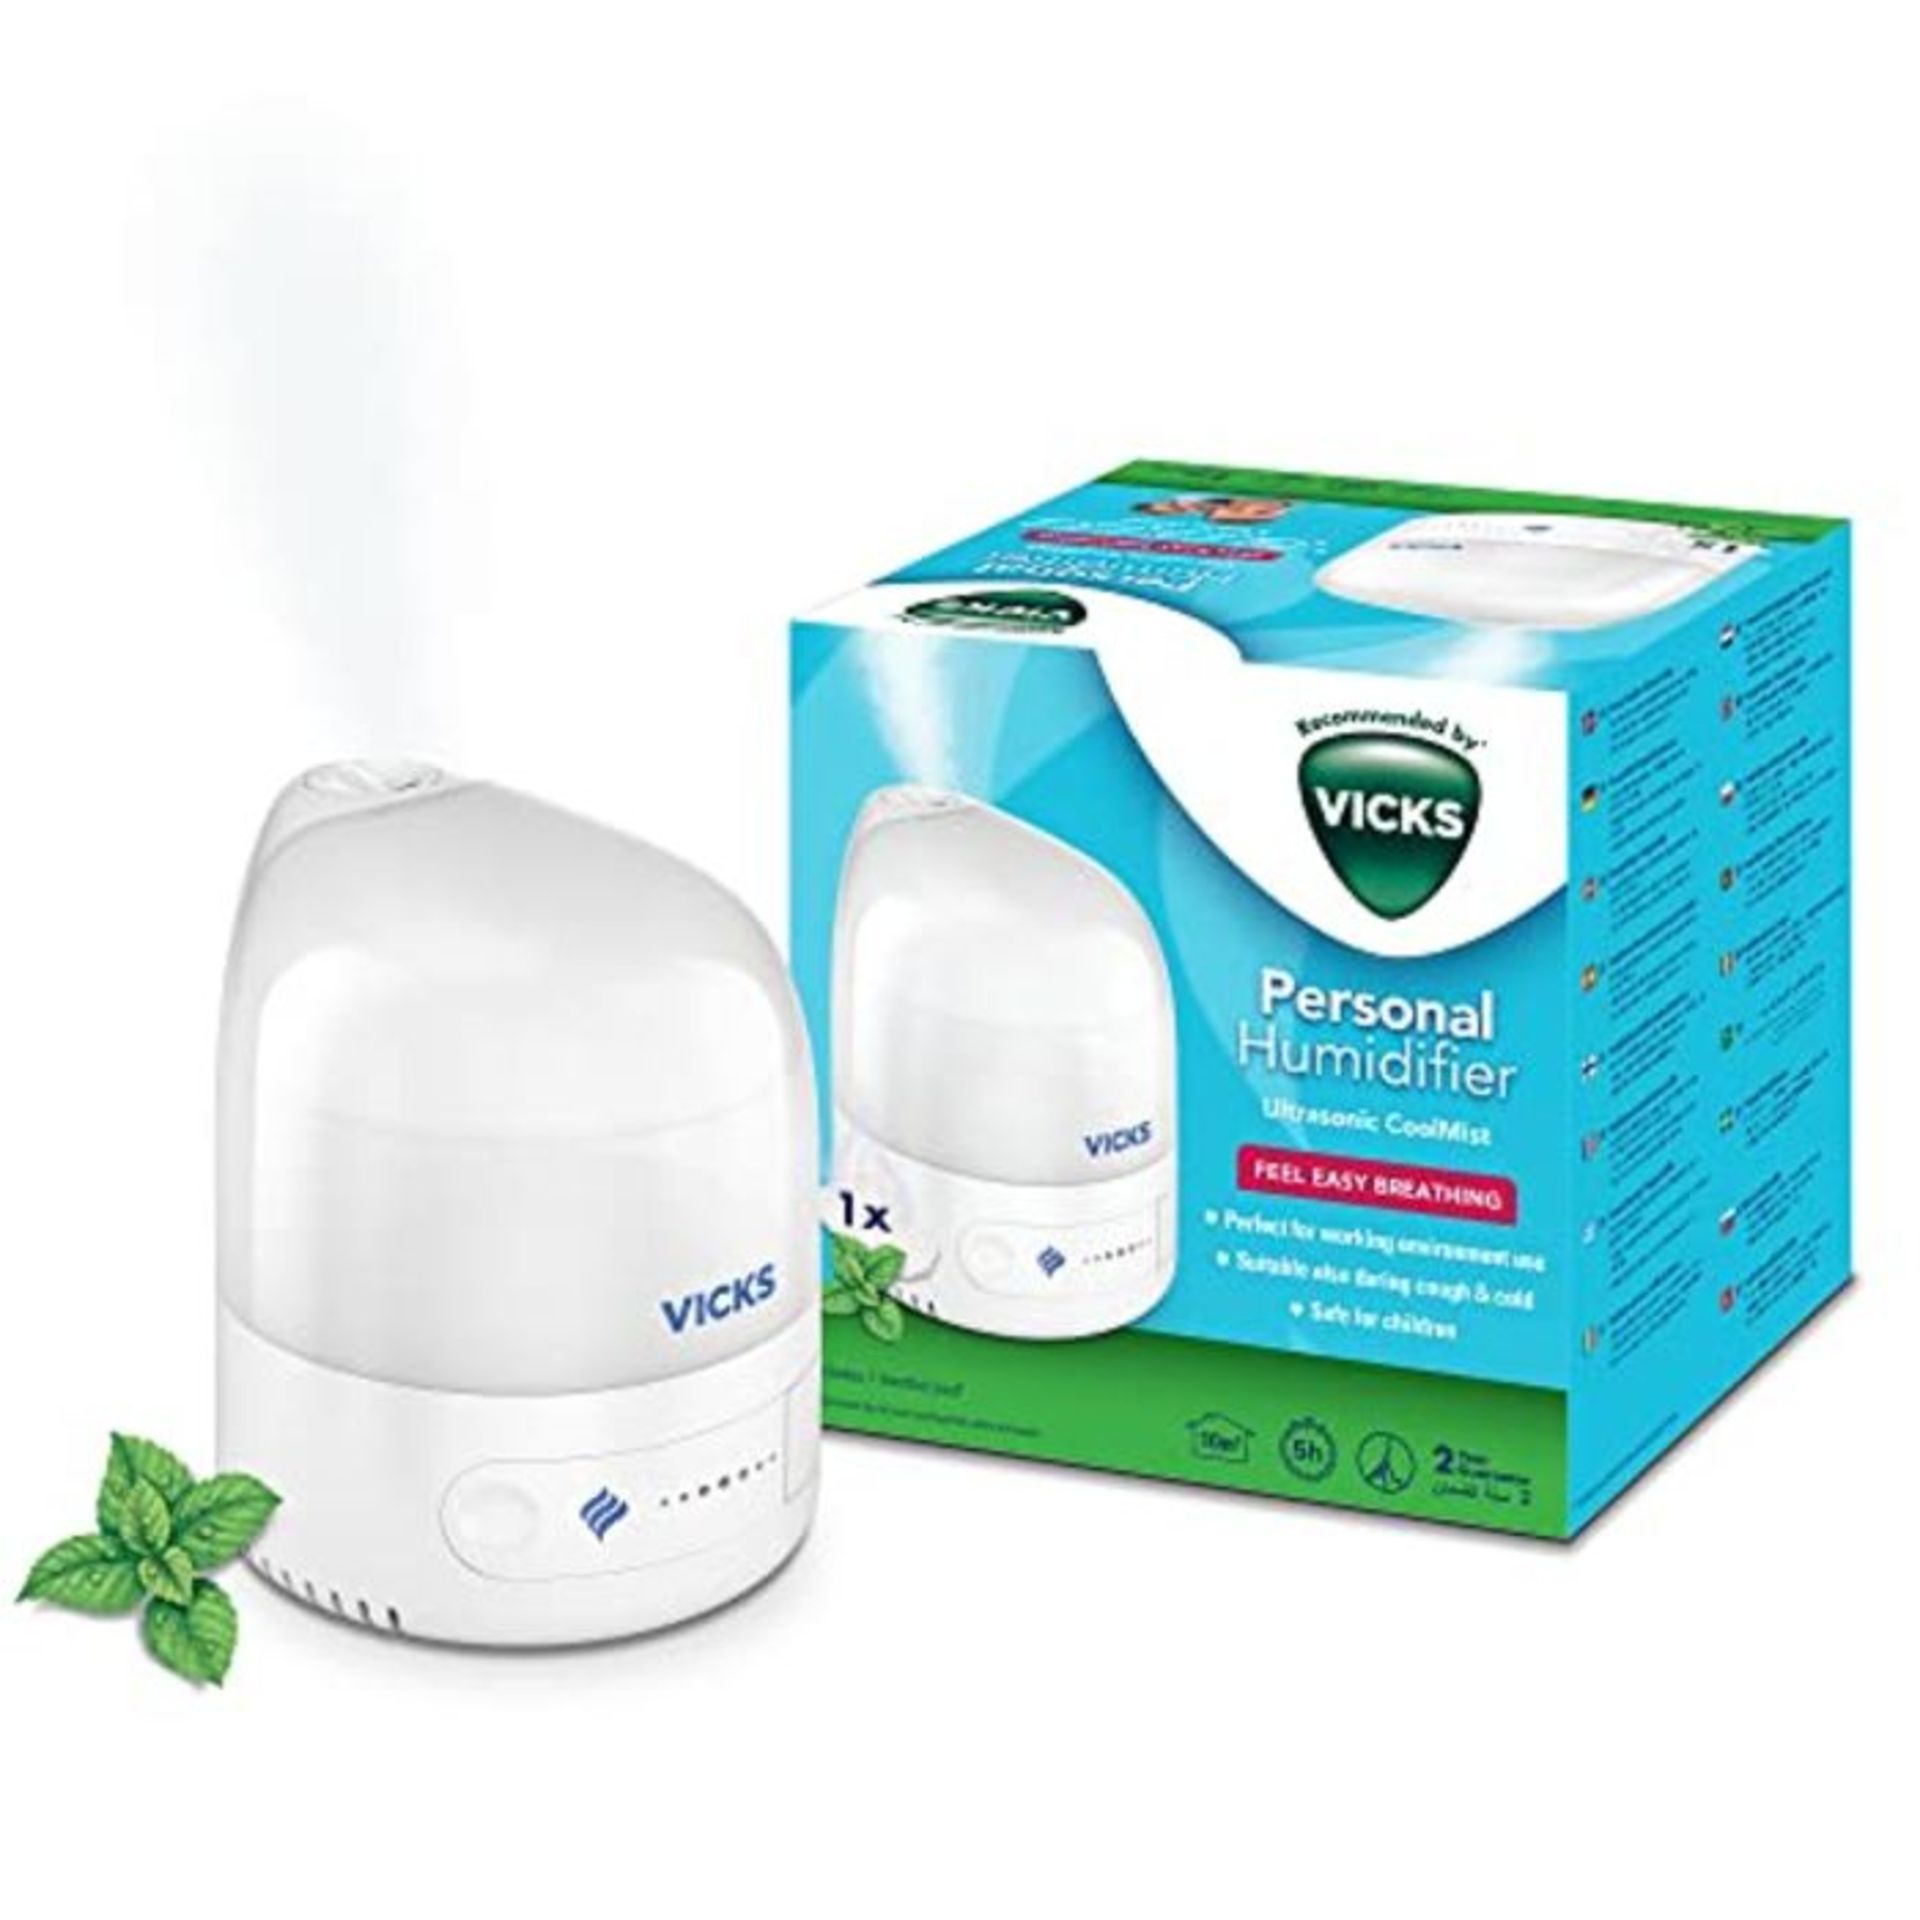 Vicks Personal Cool Mist Ultrasonic Humidifier - Small, Easy to Use, Quiet - Constant